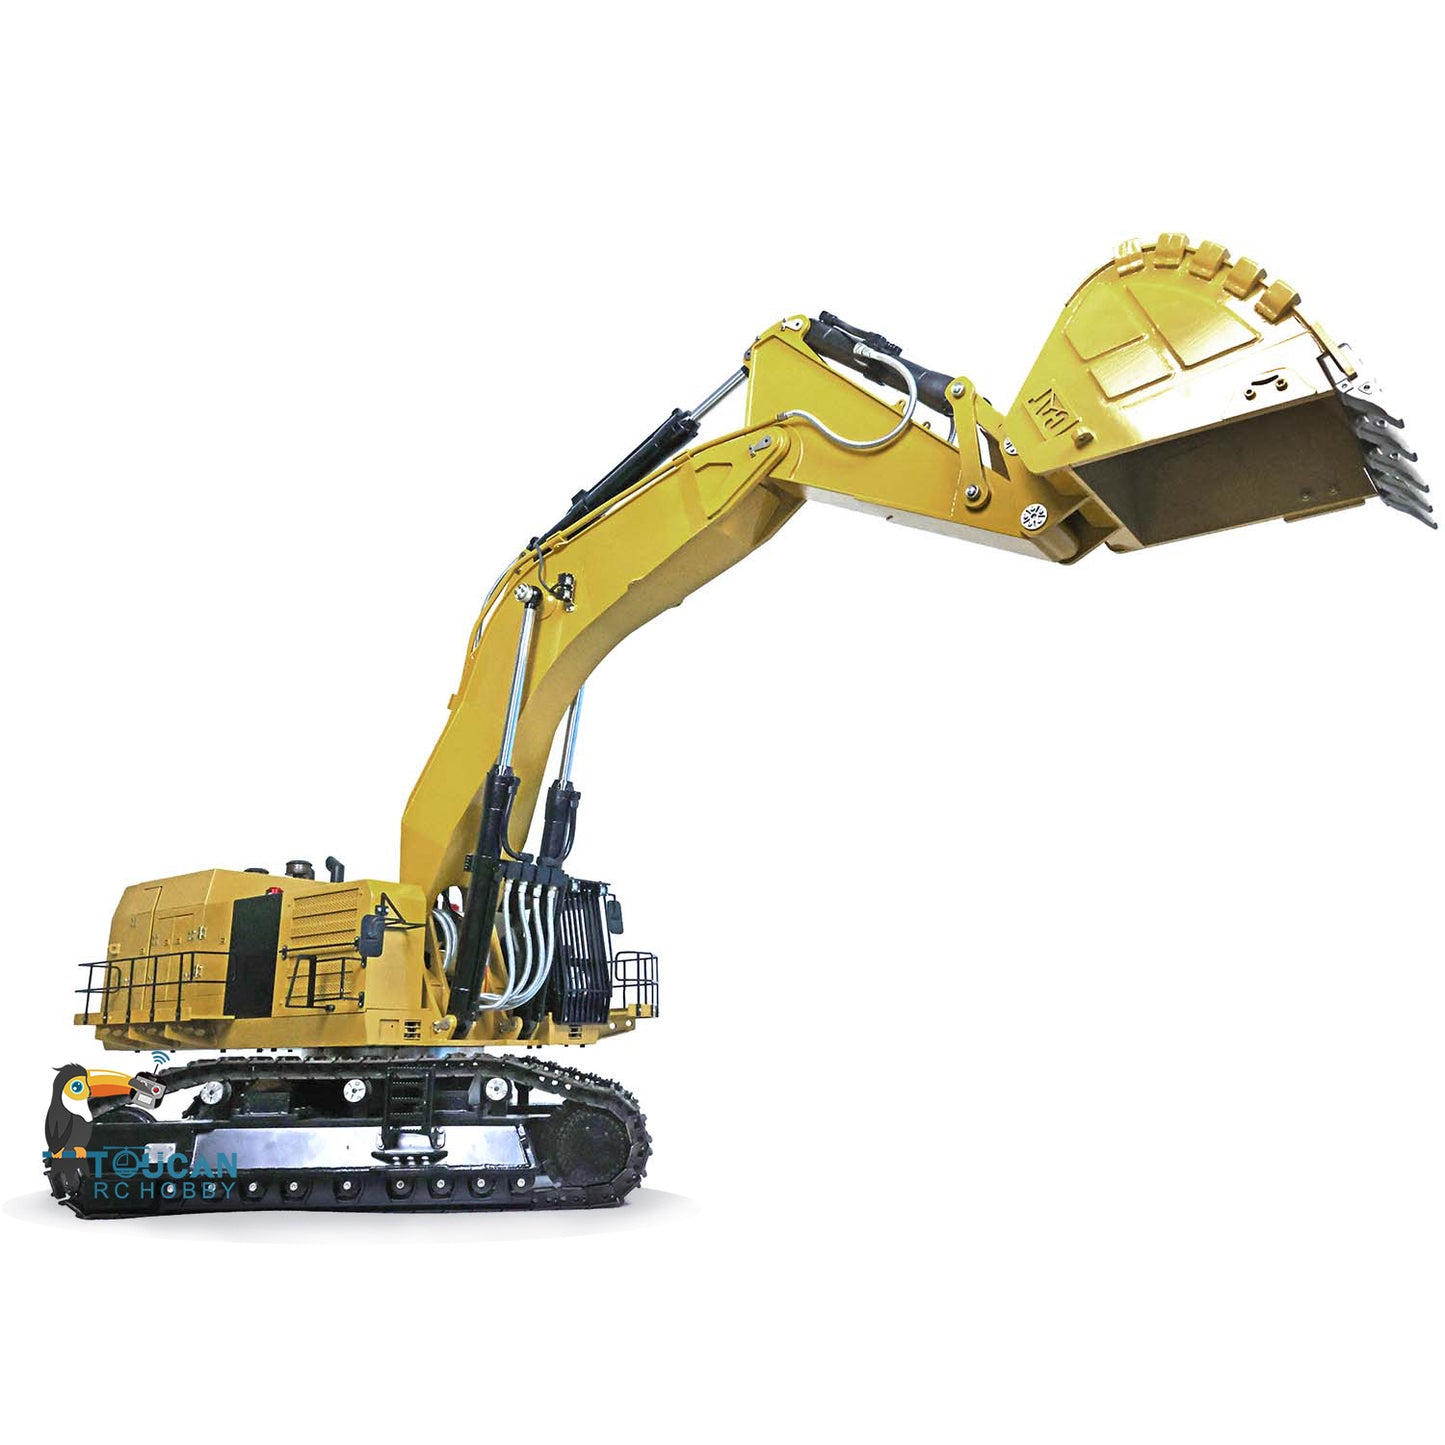 50KG 1/14 Cater CAT- 6015B Metal Hydraulic Radio Controlled Excavator Light Liquid Crystal display Painted Assembled Body Rotates 360Degrees